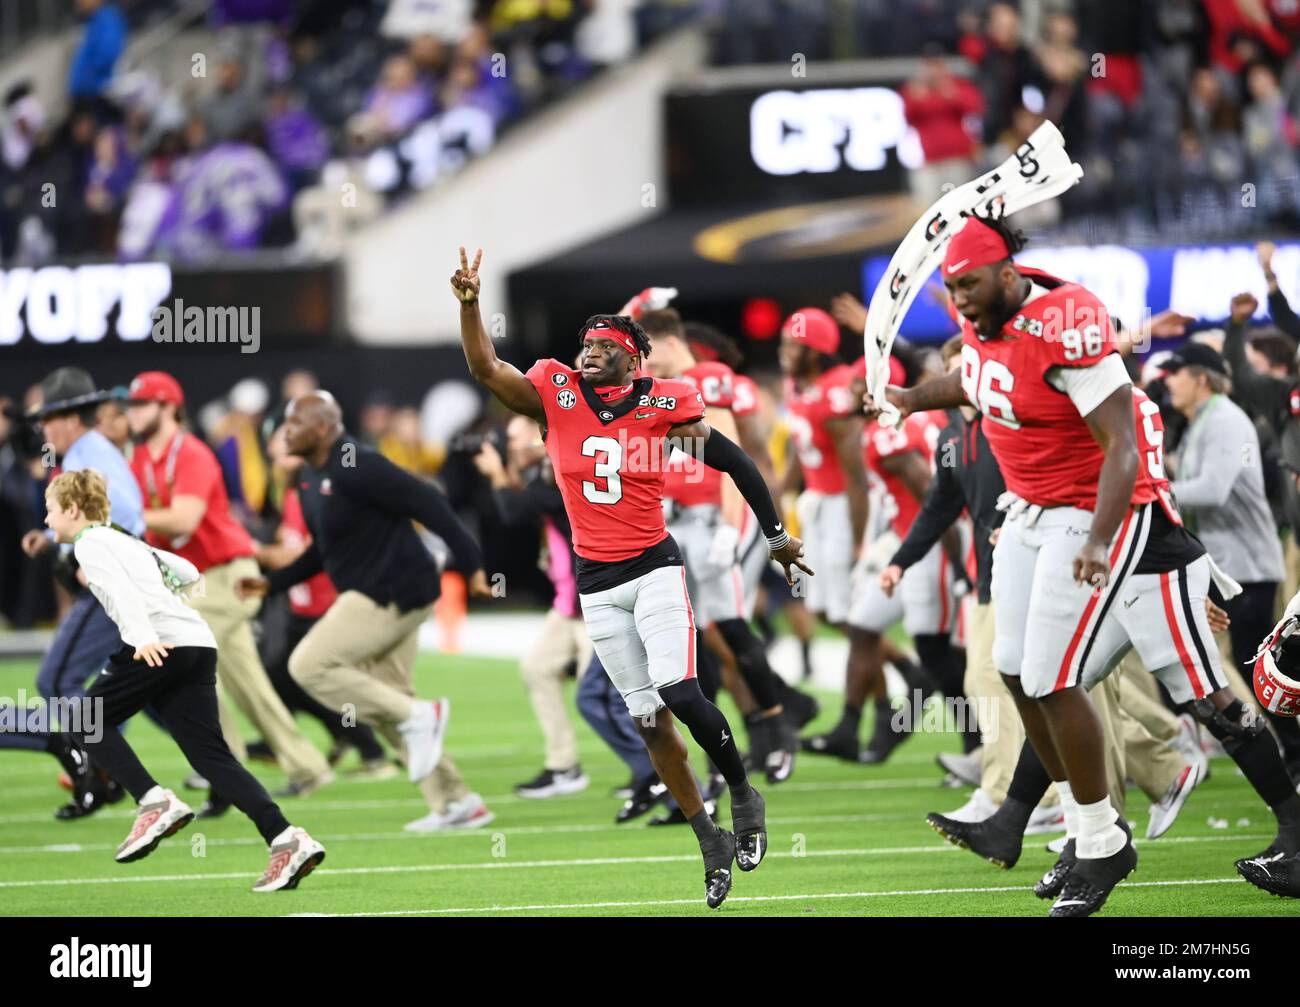 Inglewood, United States. 09th Jan, 2023. Georgia Bulldogs players celebrate after defeating the TCU Horned Frogs at the 2023 NCAA College Football National Championship between Georgia and TCU at SoFi Stadium in Inglewood, California, on Monday, January 9, 2023. Georgia defeated TCU 65-7. Photo by Mike Goulding/UPI Credit: UPI/Alamy Live News Stock Photo